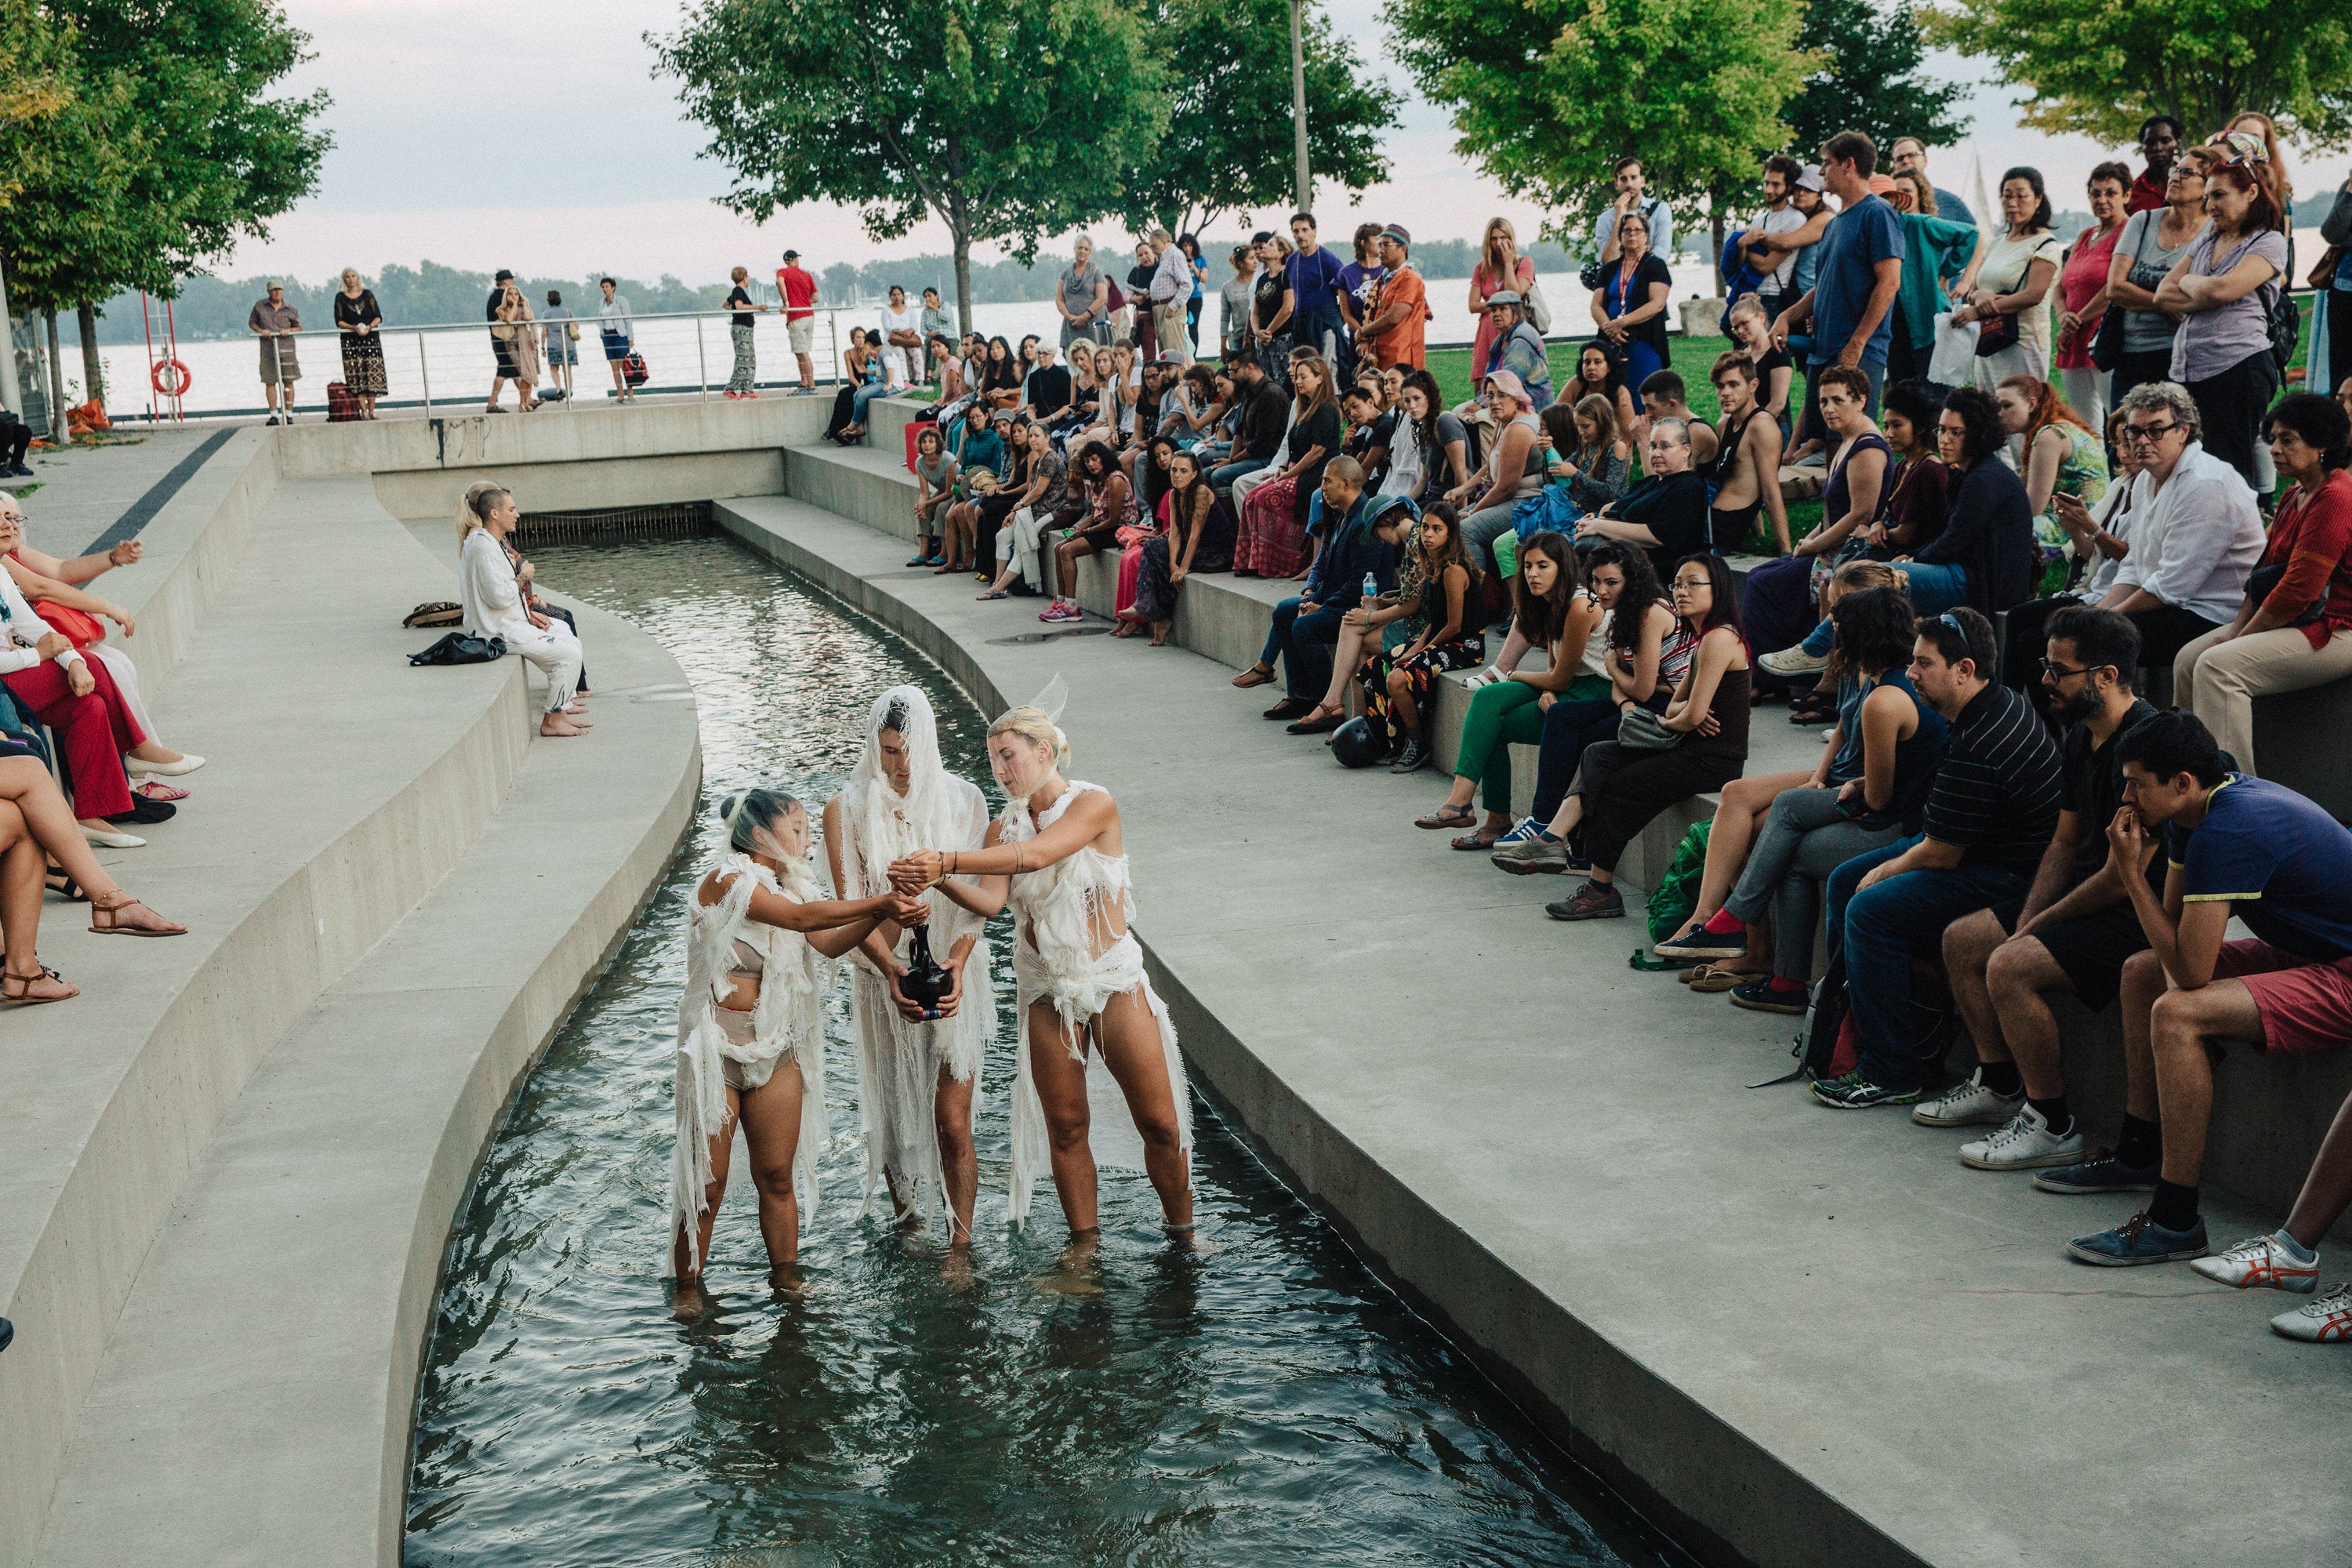 An audience watching The Gata: Water Ceremony performers in the urban river at Sherbourne Common.